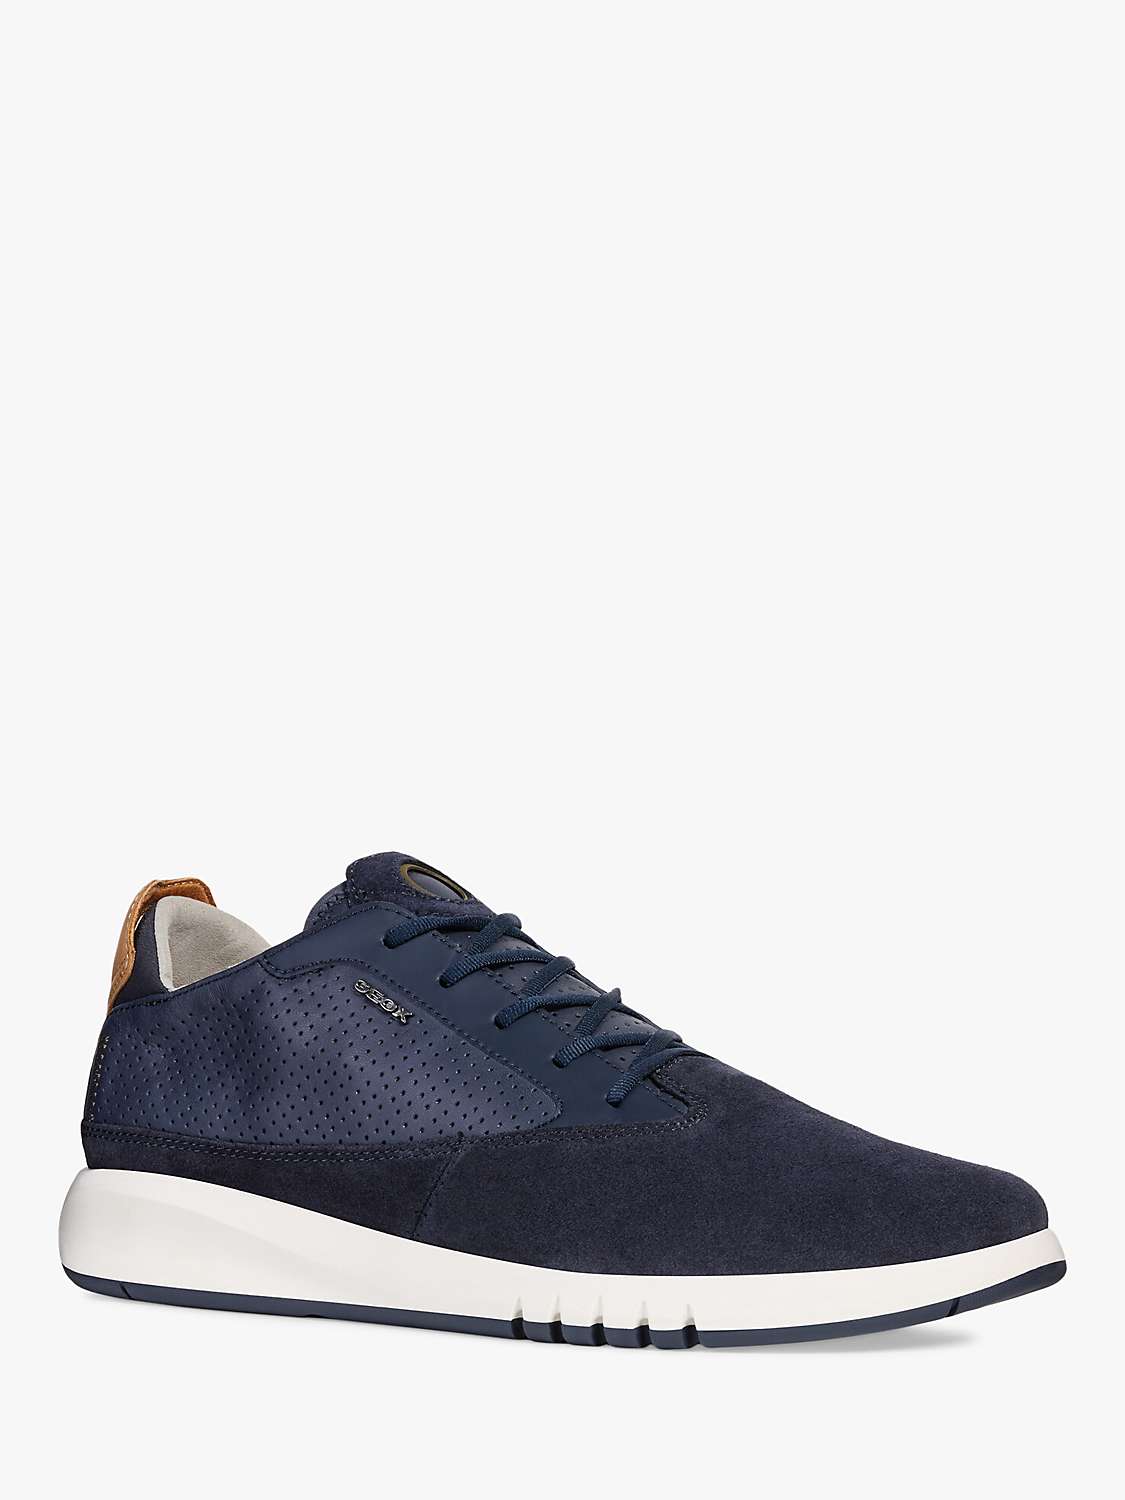 Buy Geox Aerantis Leather Trainers, Blue Online at johnlewis.com